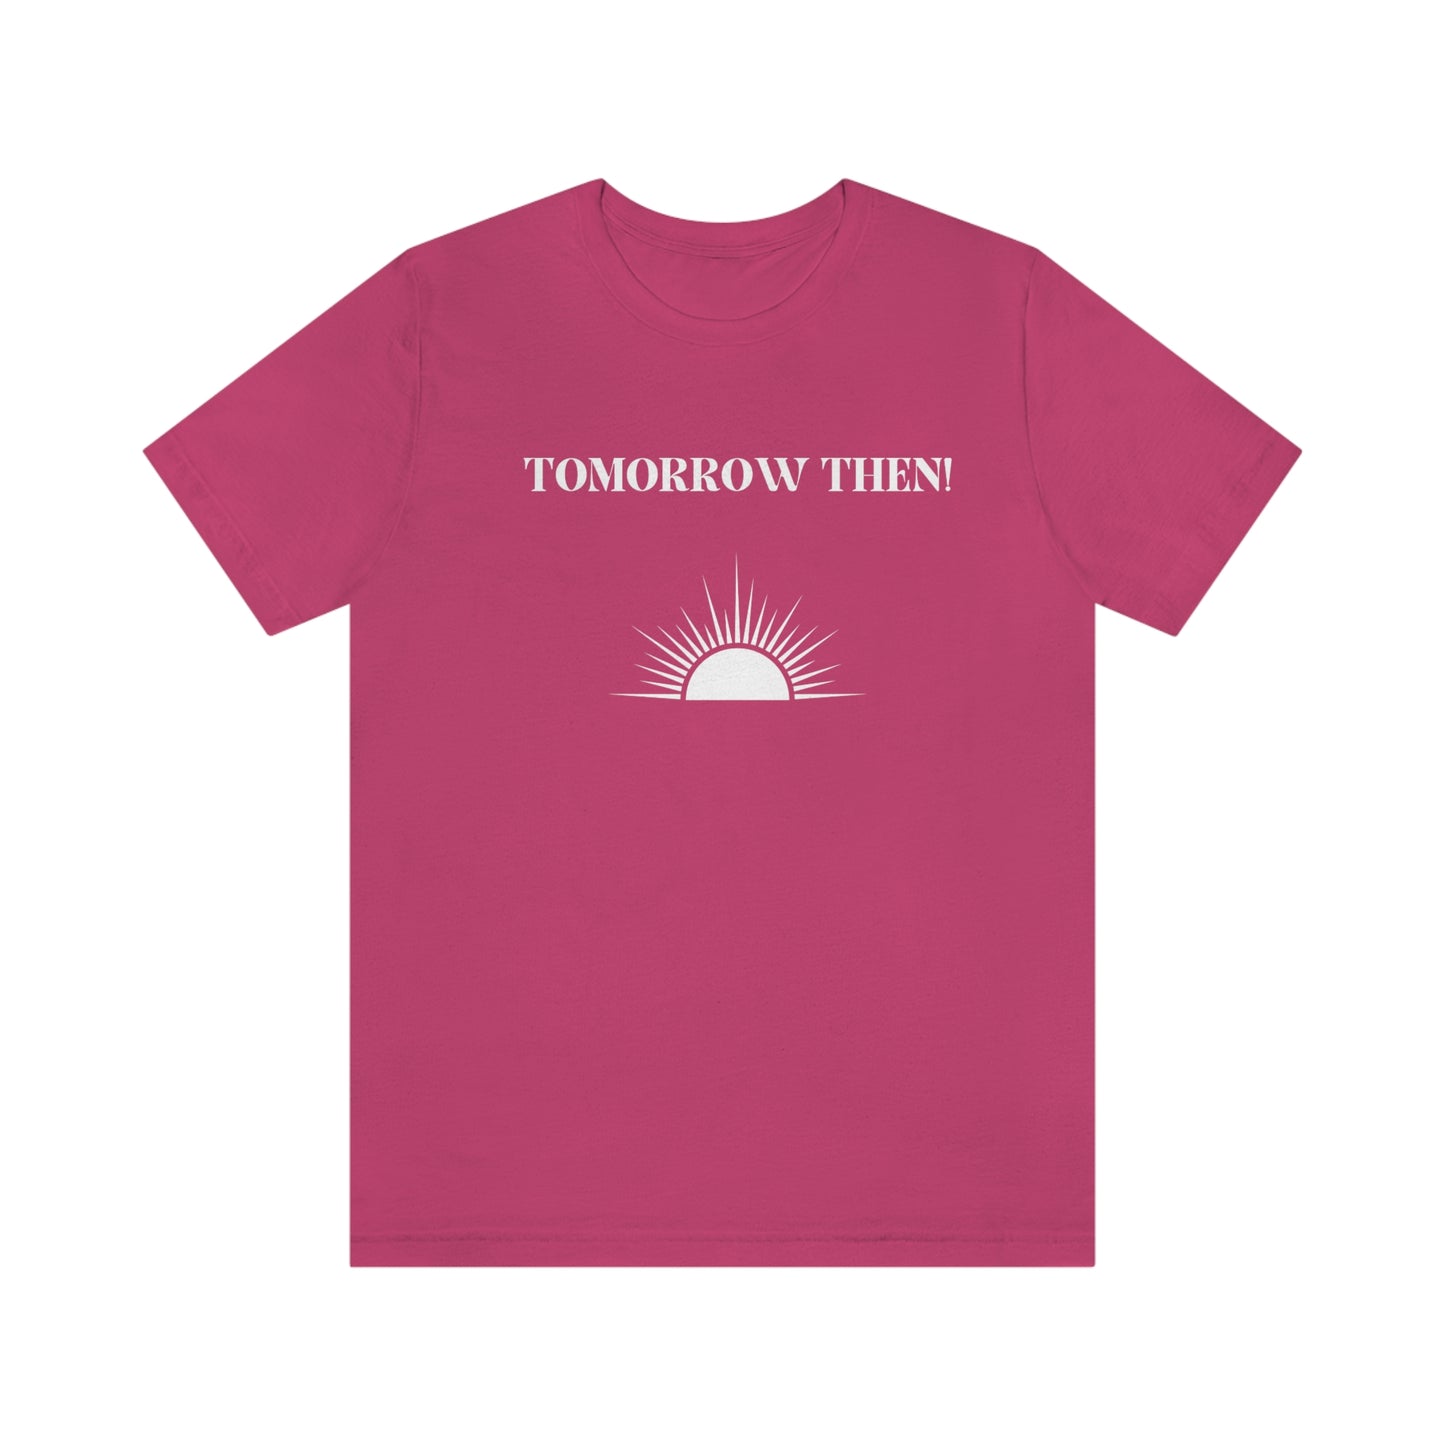 Tomorrow then t shirt, t shirt with inspirational words t shirts to encourage loved ones, tshirt gift for friends,hopeful affirmations